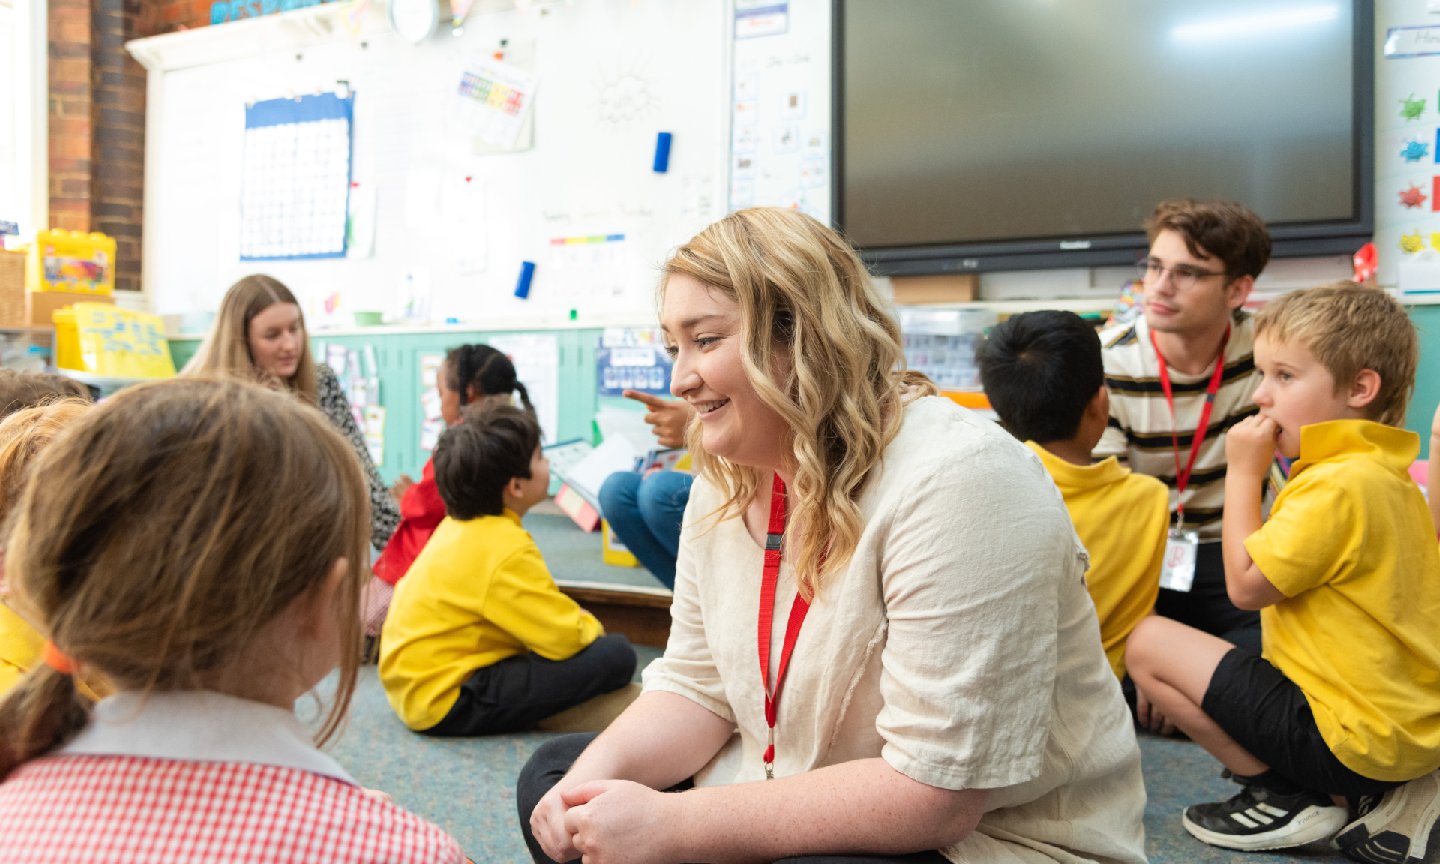 An RMIT education student sitting in a classroom with primary school students